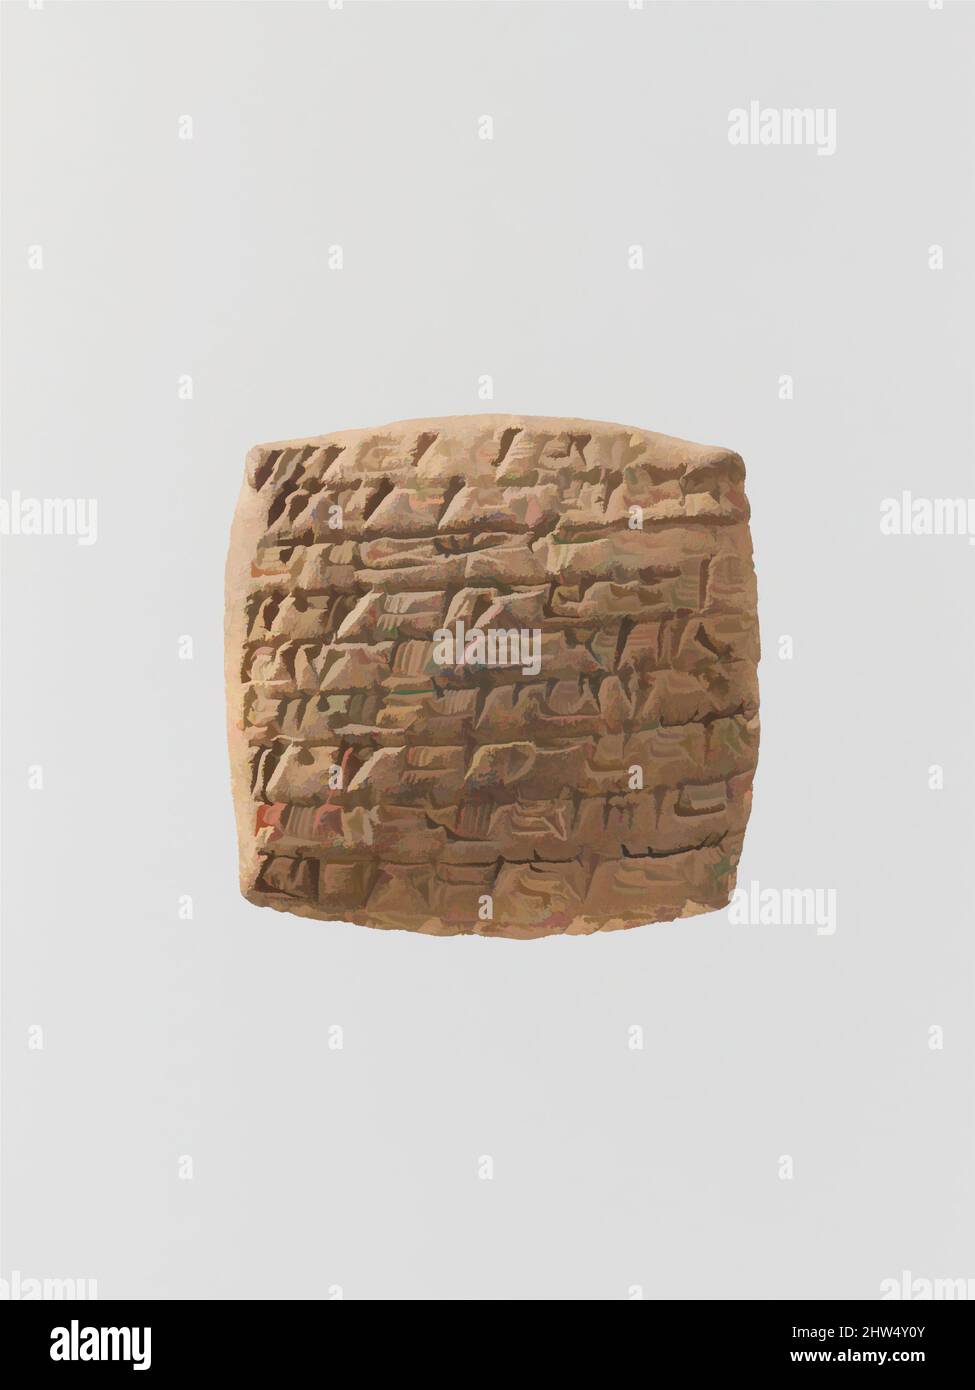 Art inspired by Cuneiform tablet: quittance for a loan in silver, Middle Bronze Age–Old Assyrian Trading Colony, ca. 20th–19th century B.C., Anatolia, probably from Kültepe (Karum Kanesh), Old Assyrian Trading Colony, Clay, 4.6 x 4.7 x 1.5 cm (1 3/4 x 1 7/8 x 5/8 in.), Clay-Tablets-, Classic works modernized by Artotop with a splash of modernity. Shapes, color and value, eye-catching visual impact on art. Emotions through freedom of artworks in a contemporary way. A timeless message pursuing a wildly creative new direction. Artists turning to the digital medium and creating the Artotop NFT Stock Photo